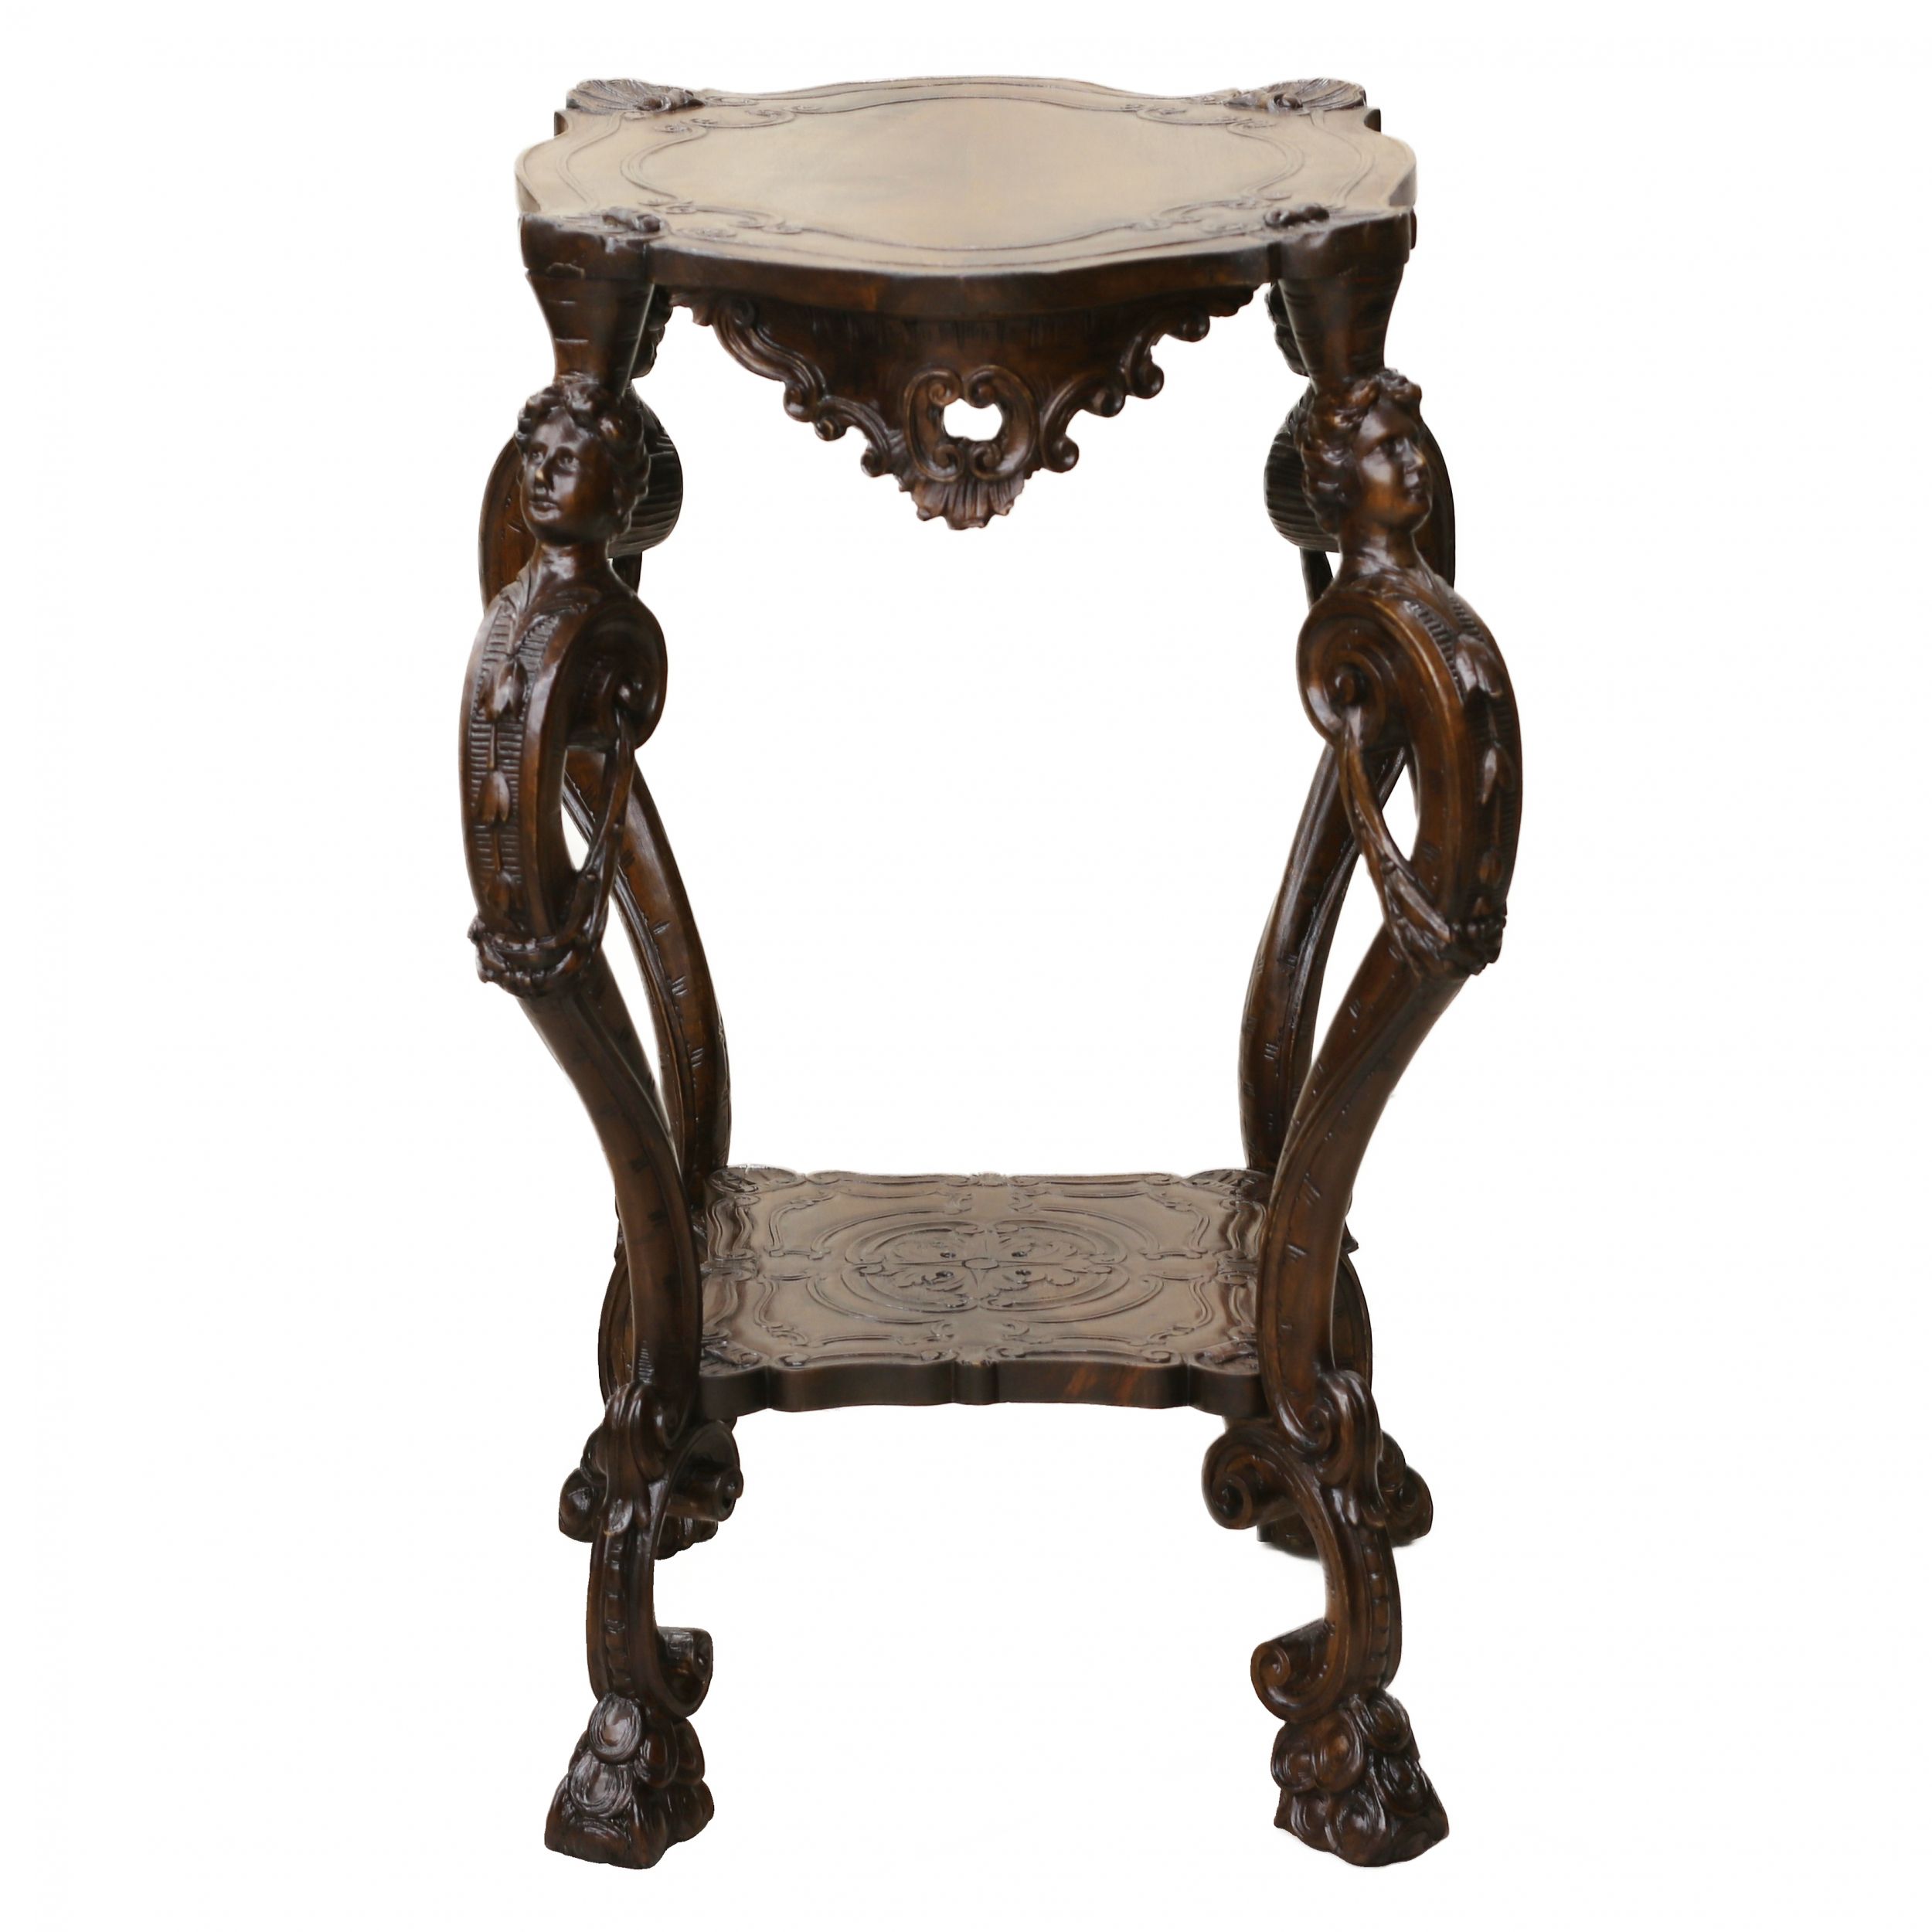 Carved wooden table in neo-Rococo style from the turn of the 19th century. - Image 4 of 7